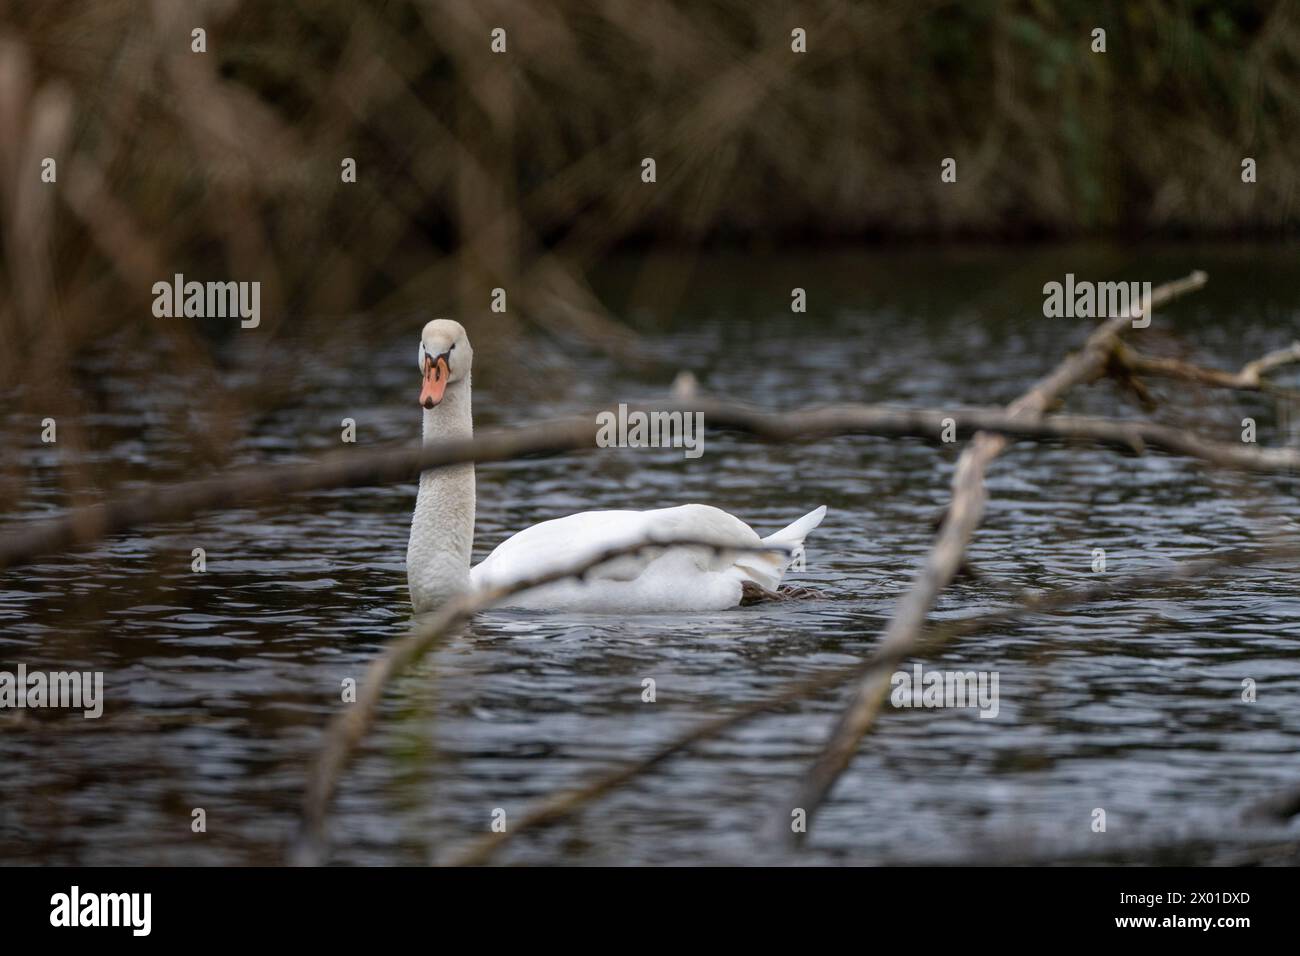 Swan swimming in a pond Stock Photo